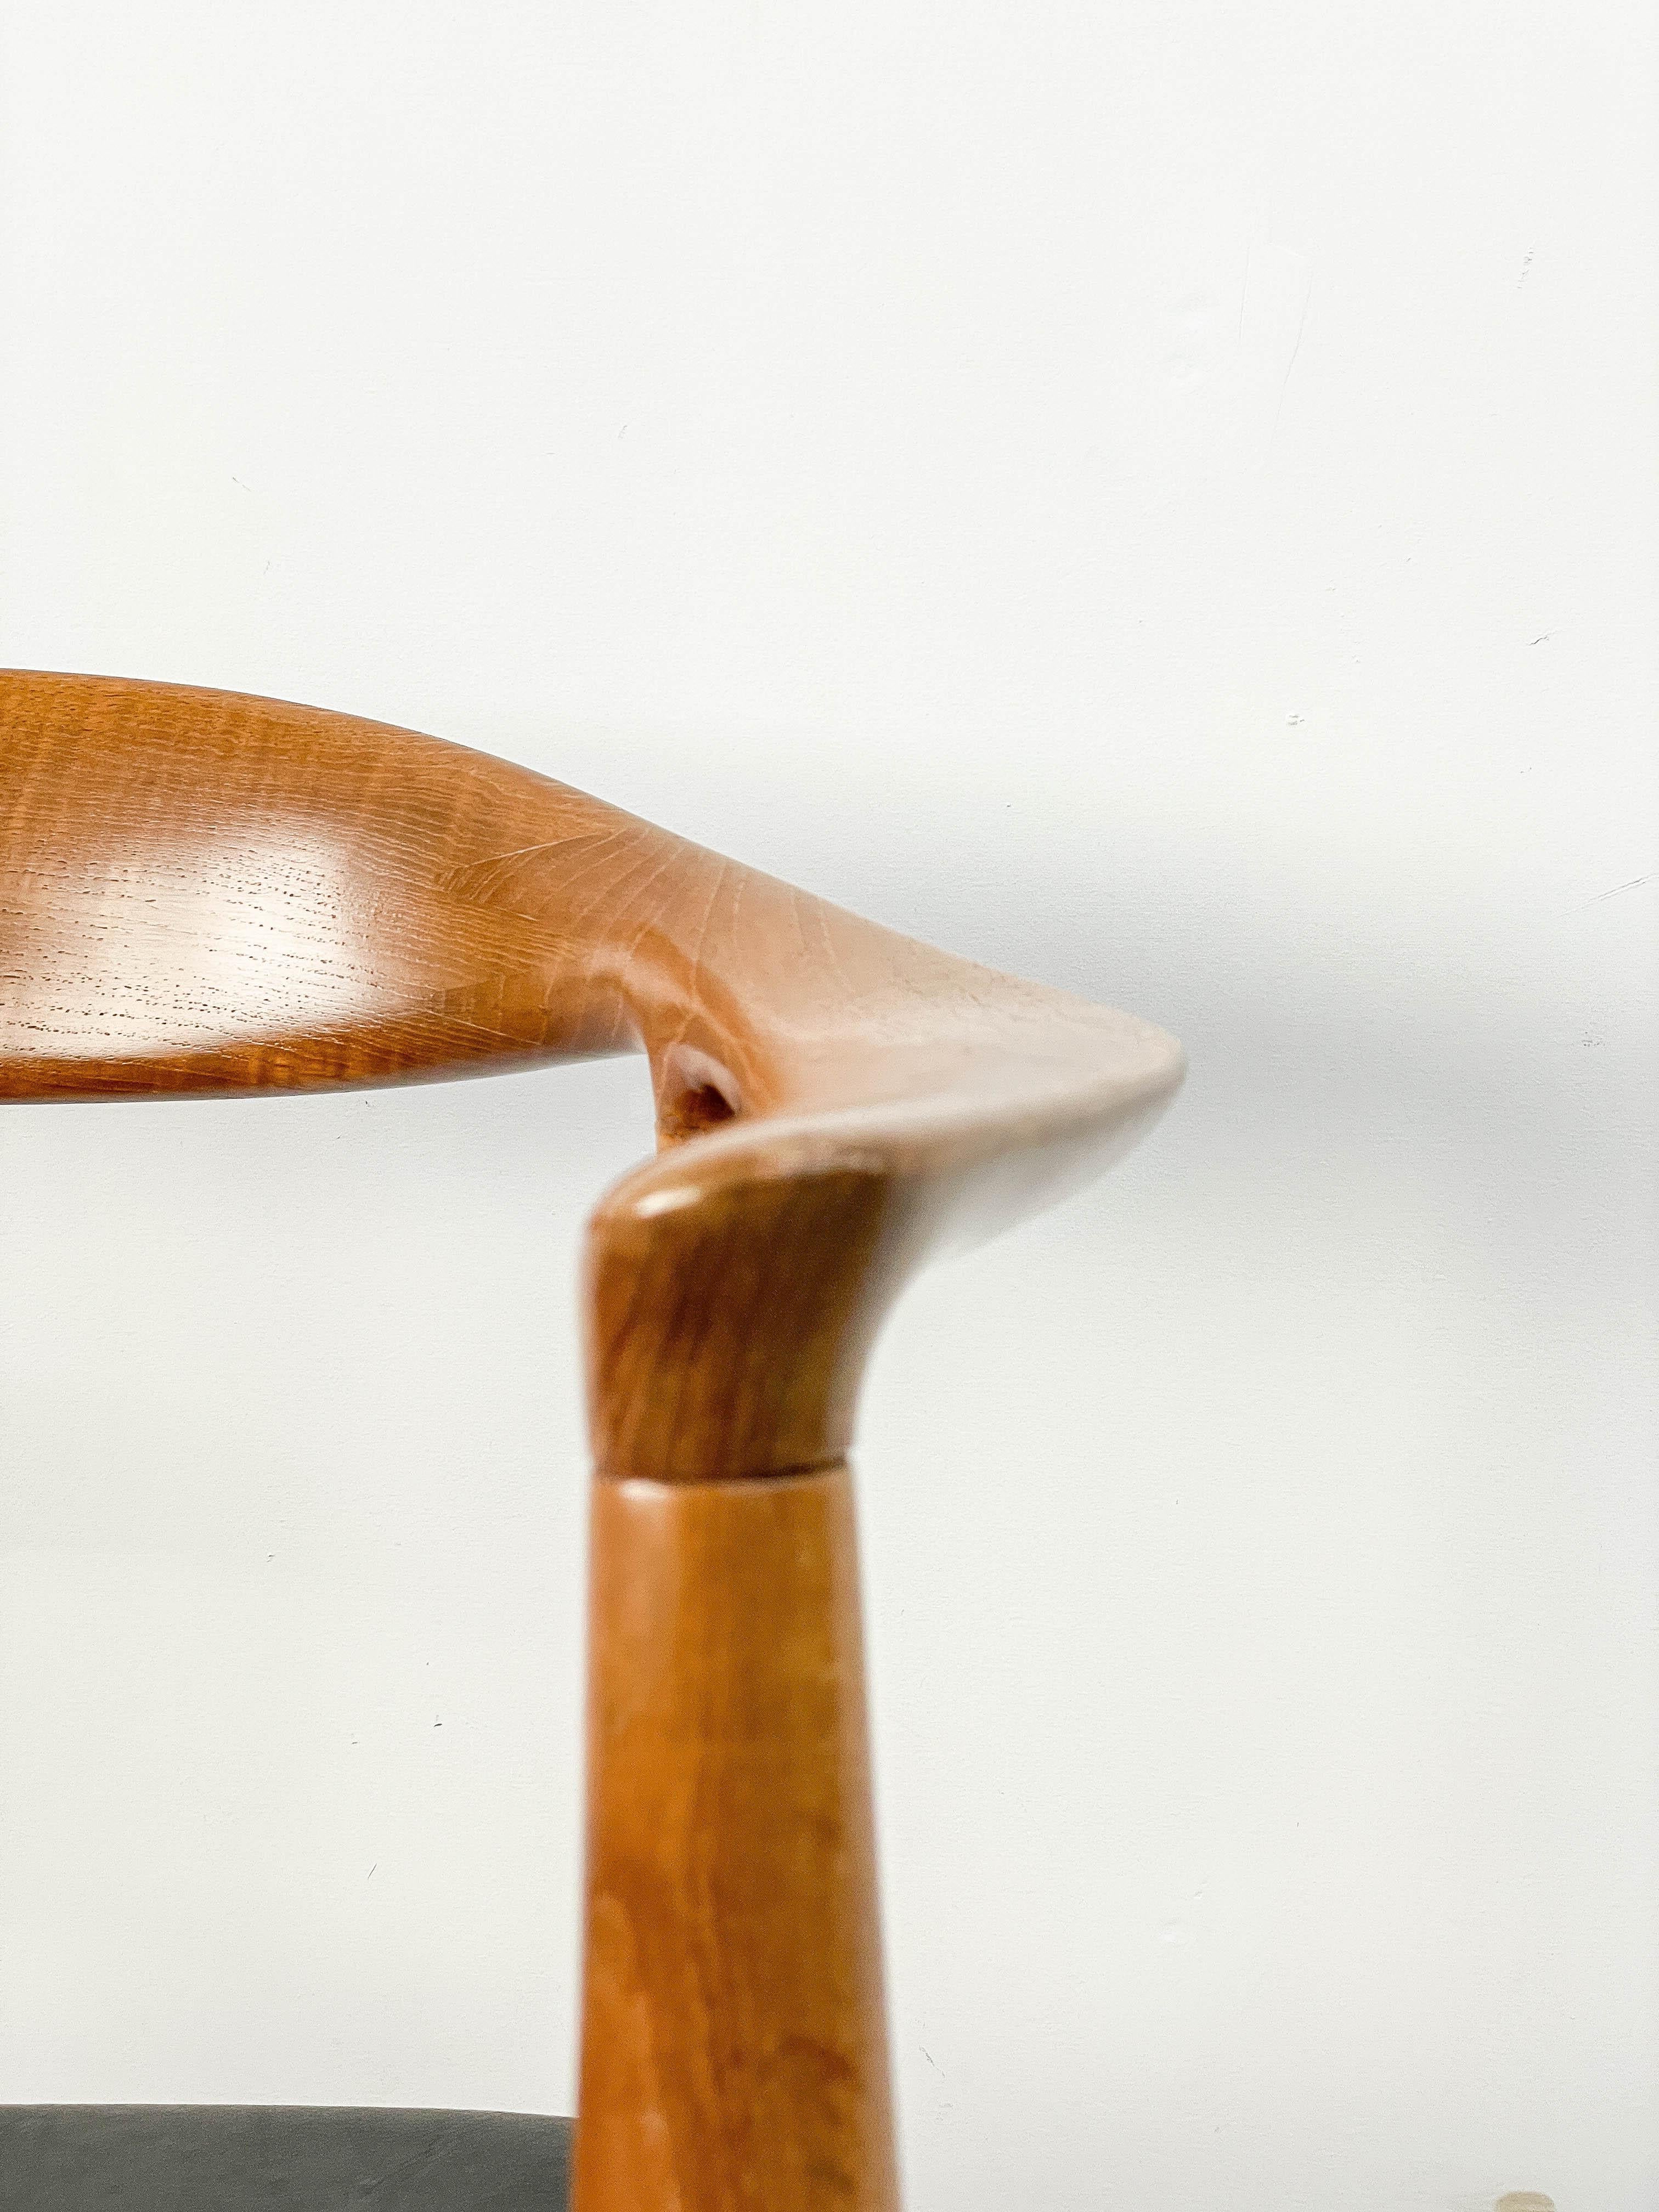 Authentic vintage Hans Wegner JH 503 in teak made by Johannes Hansen and sold by Georg Jensen. Known by many names, ‘The Chair’, The Round One’ and the 'Kennedy Chair'. Made famous in 1960 when Richard Nixon and John F. Kennedy sat in these chairs